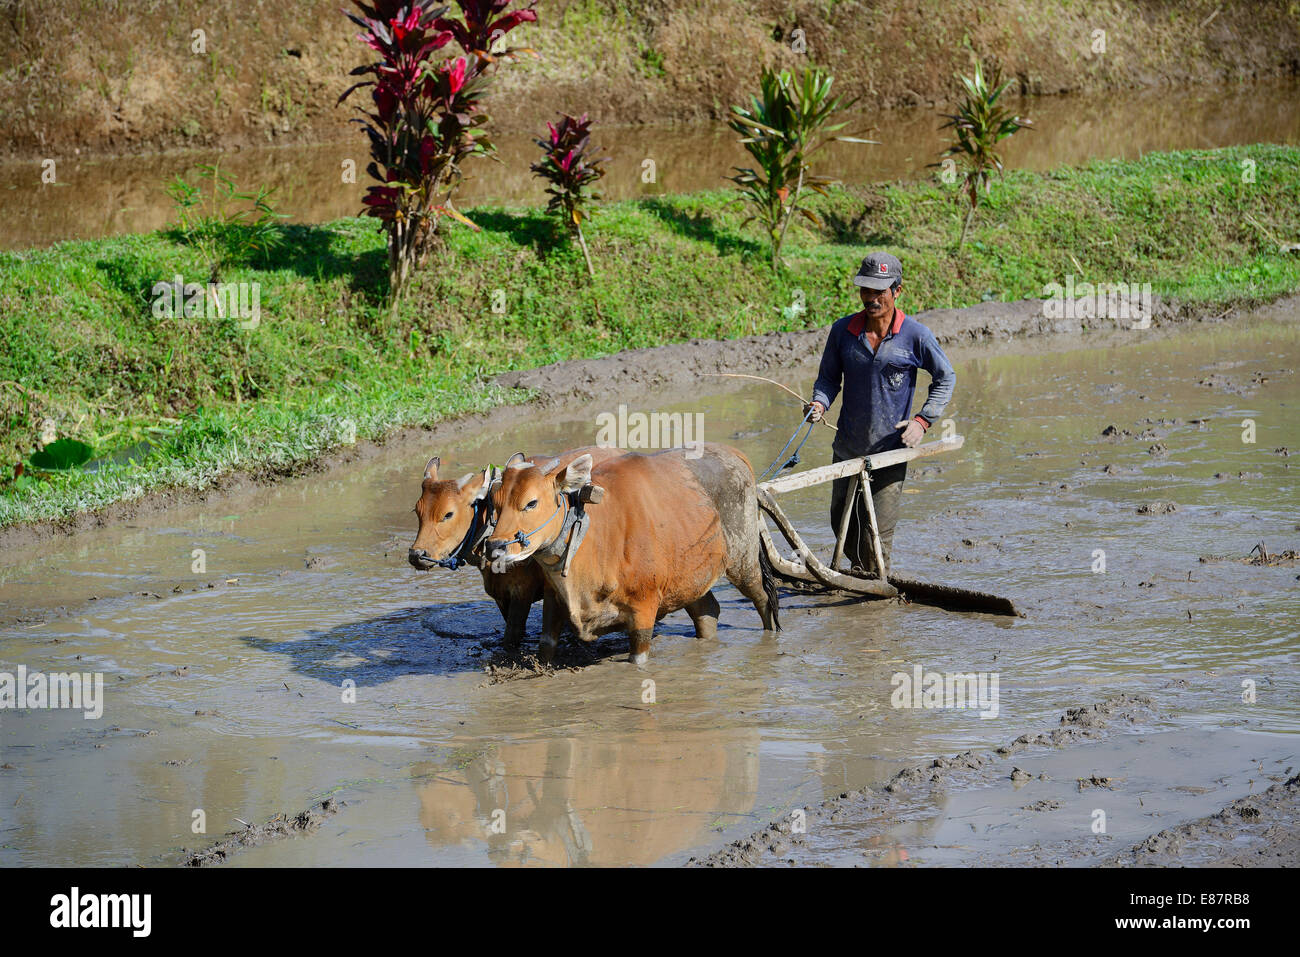 Rice farmer working with oxen on a rice paddy, rice terraces of Jatiluwih, Bali, Indonesia Stock Photo